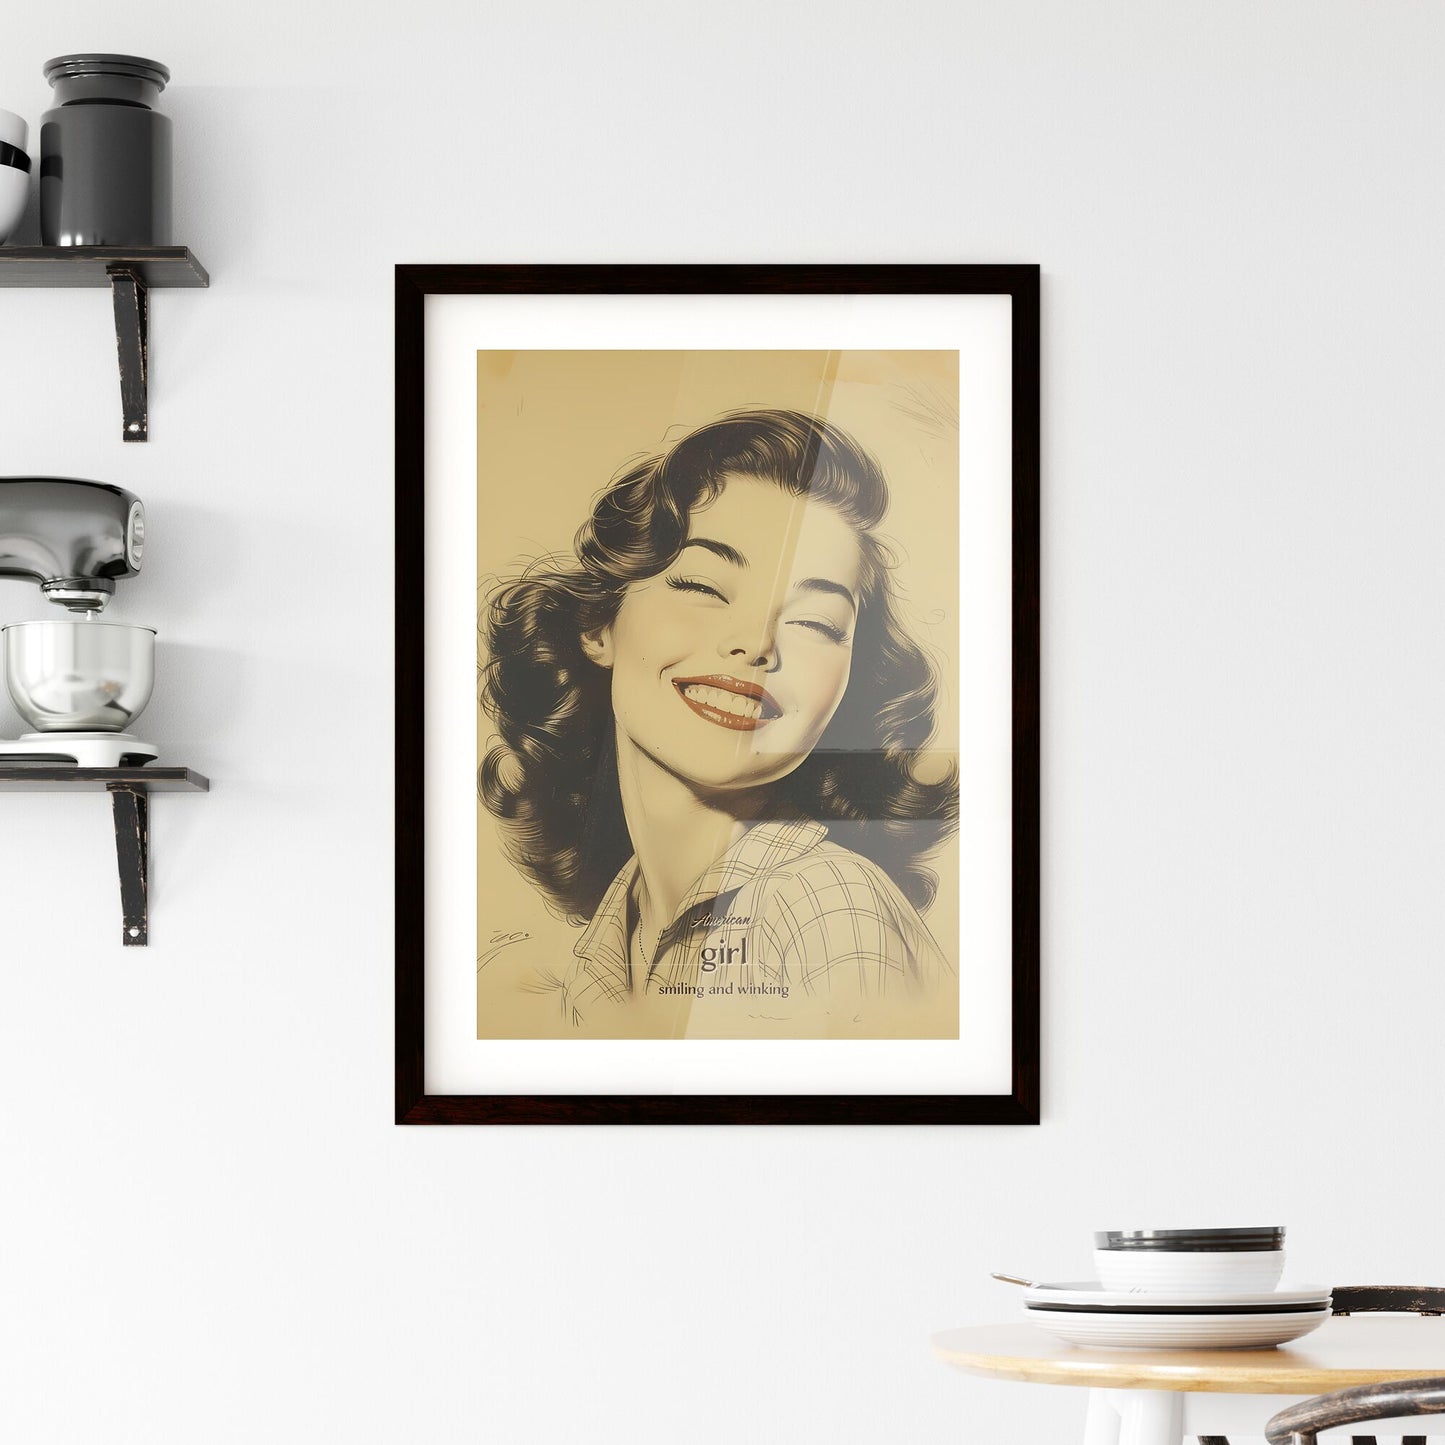 American, girl, smiling and winking, A Poster of a woman with her eyes closed Default Title